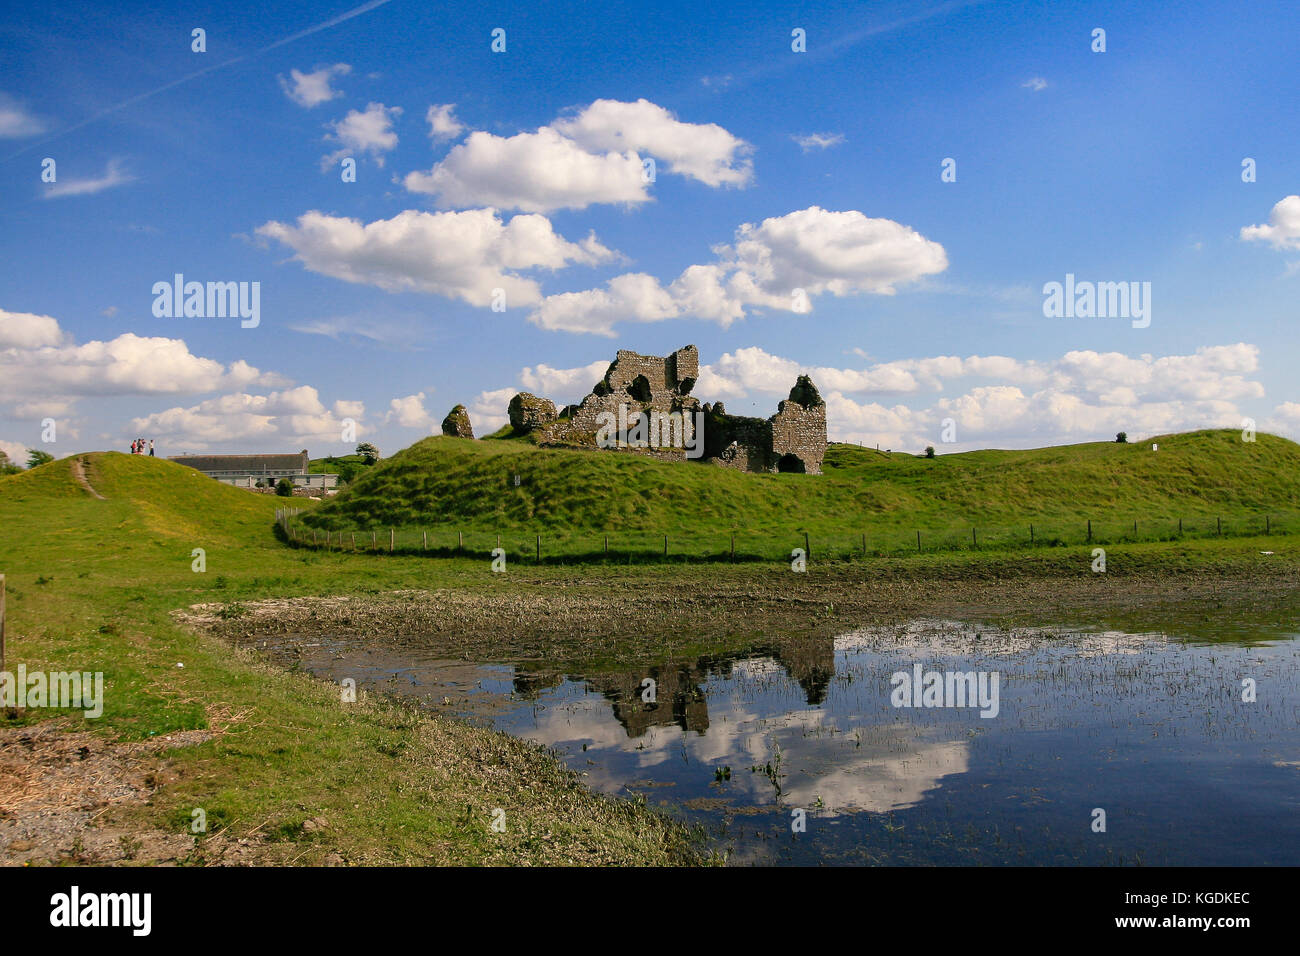 Ruins of ancient Clonmacnoise Castle build on the mound in the old monastic city Clonmacnoise, Shannonbridge, Athlone, Co. Offaly Stock Photo